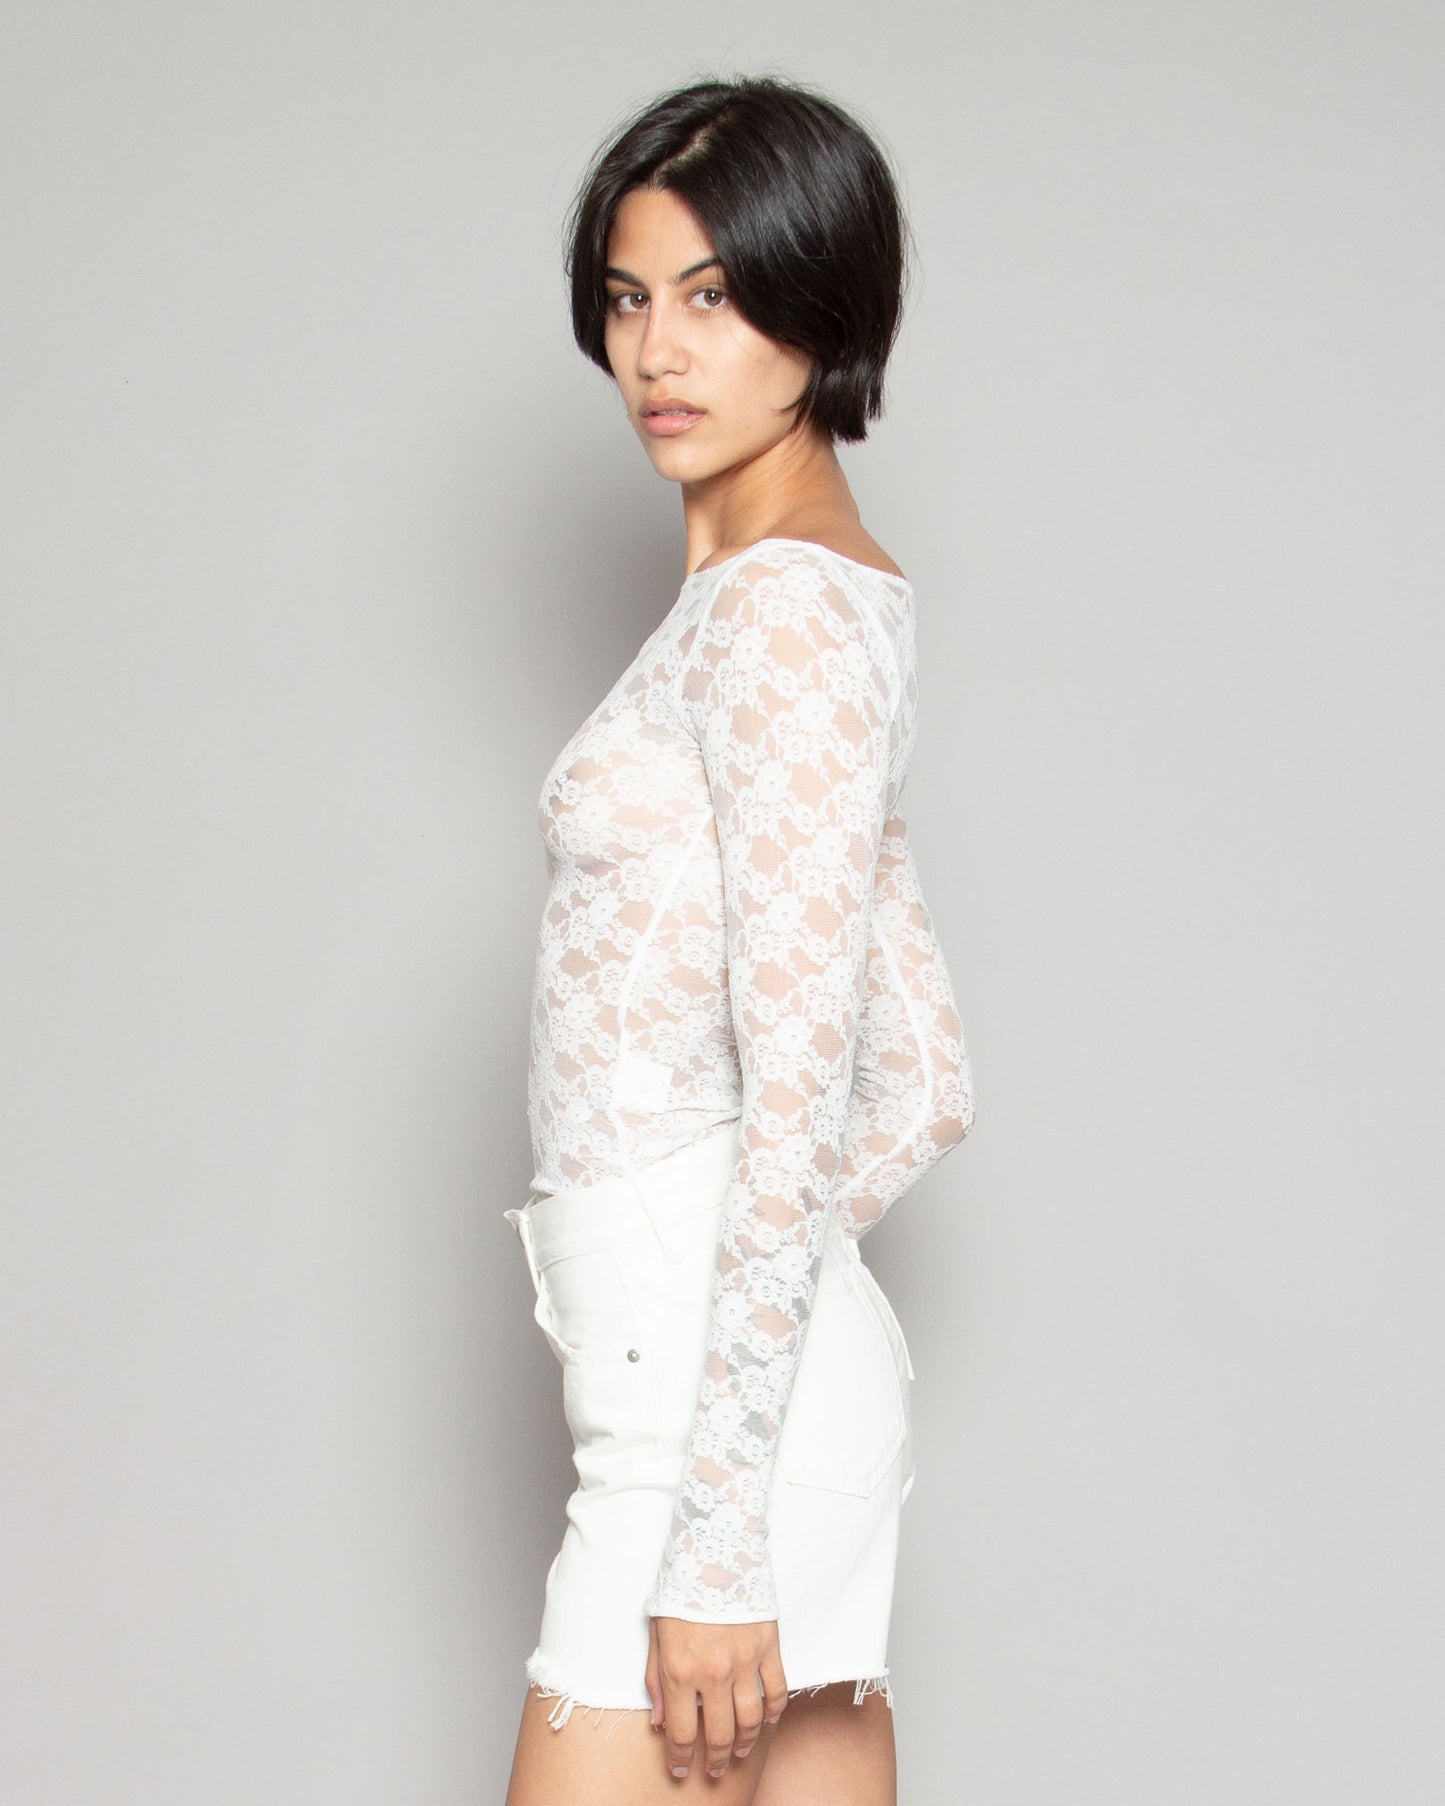 HEATHER STANKO Lace Long Sleeve Top in Purity